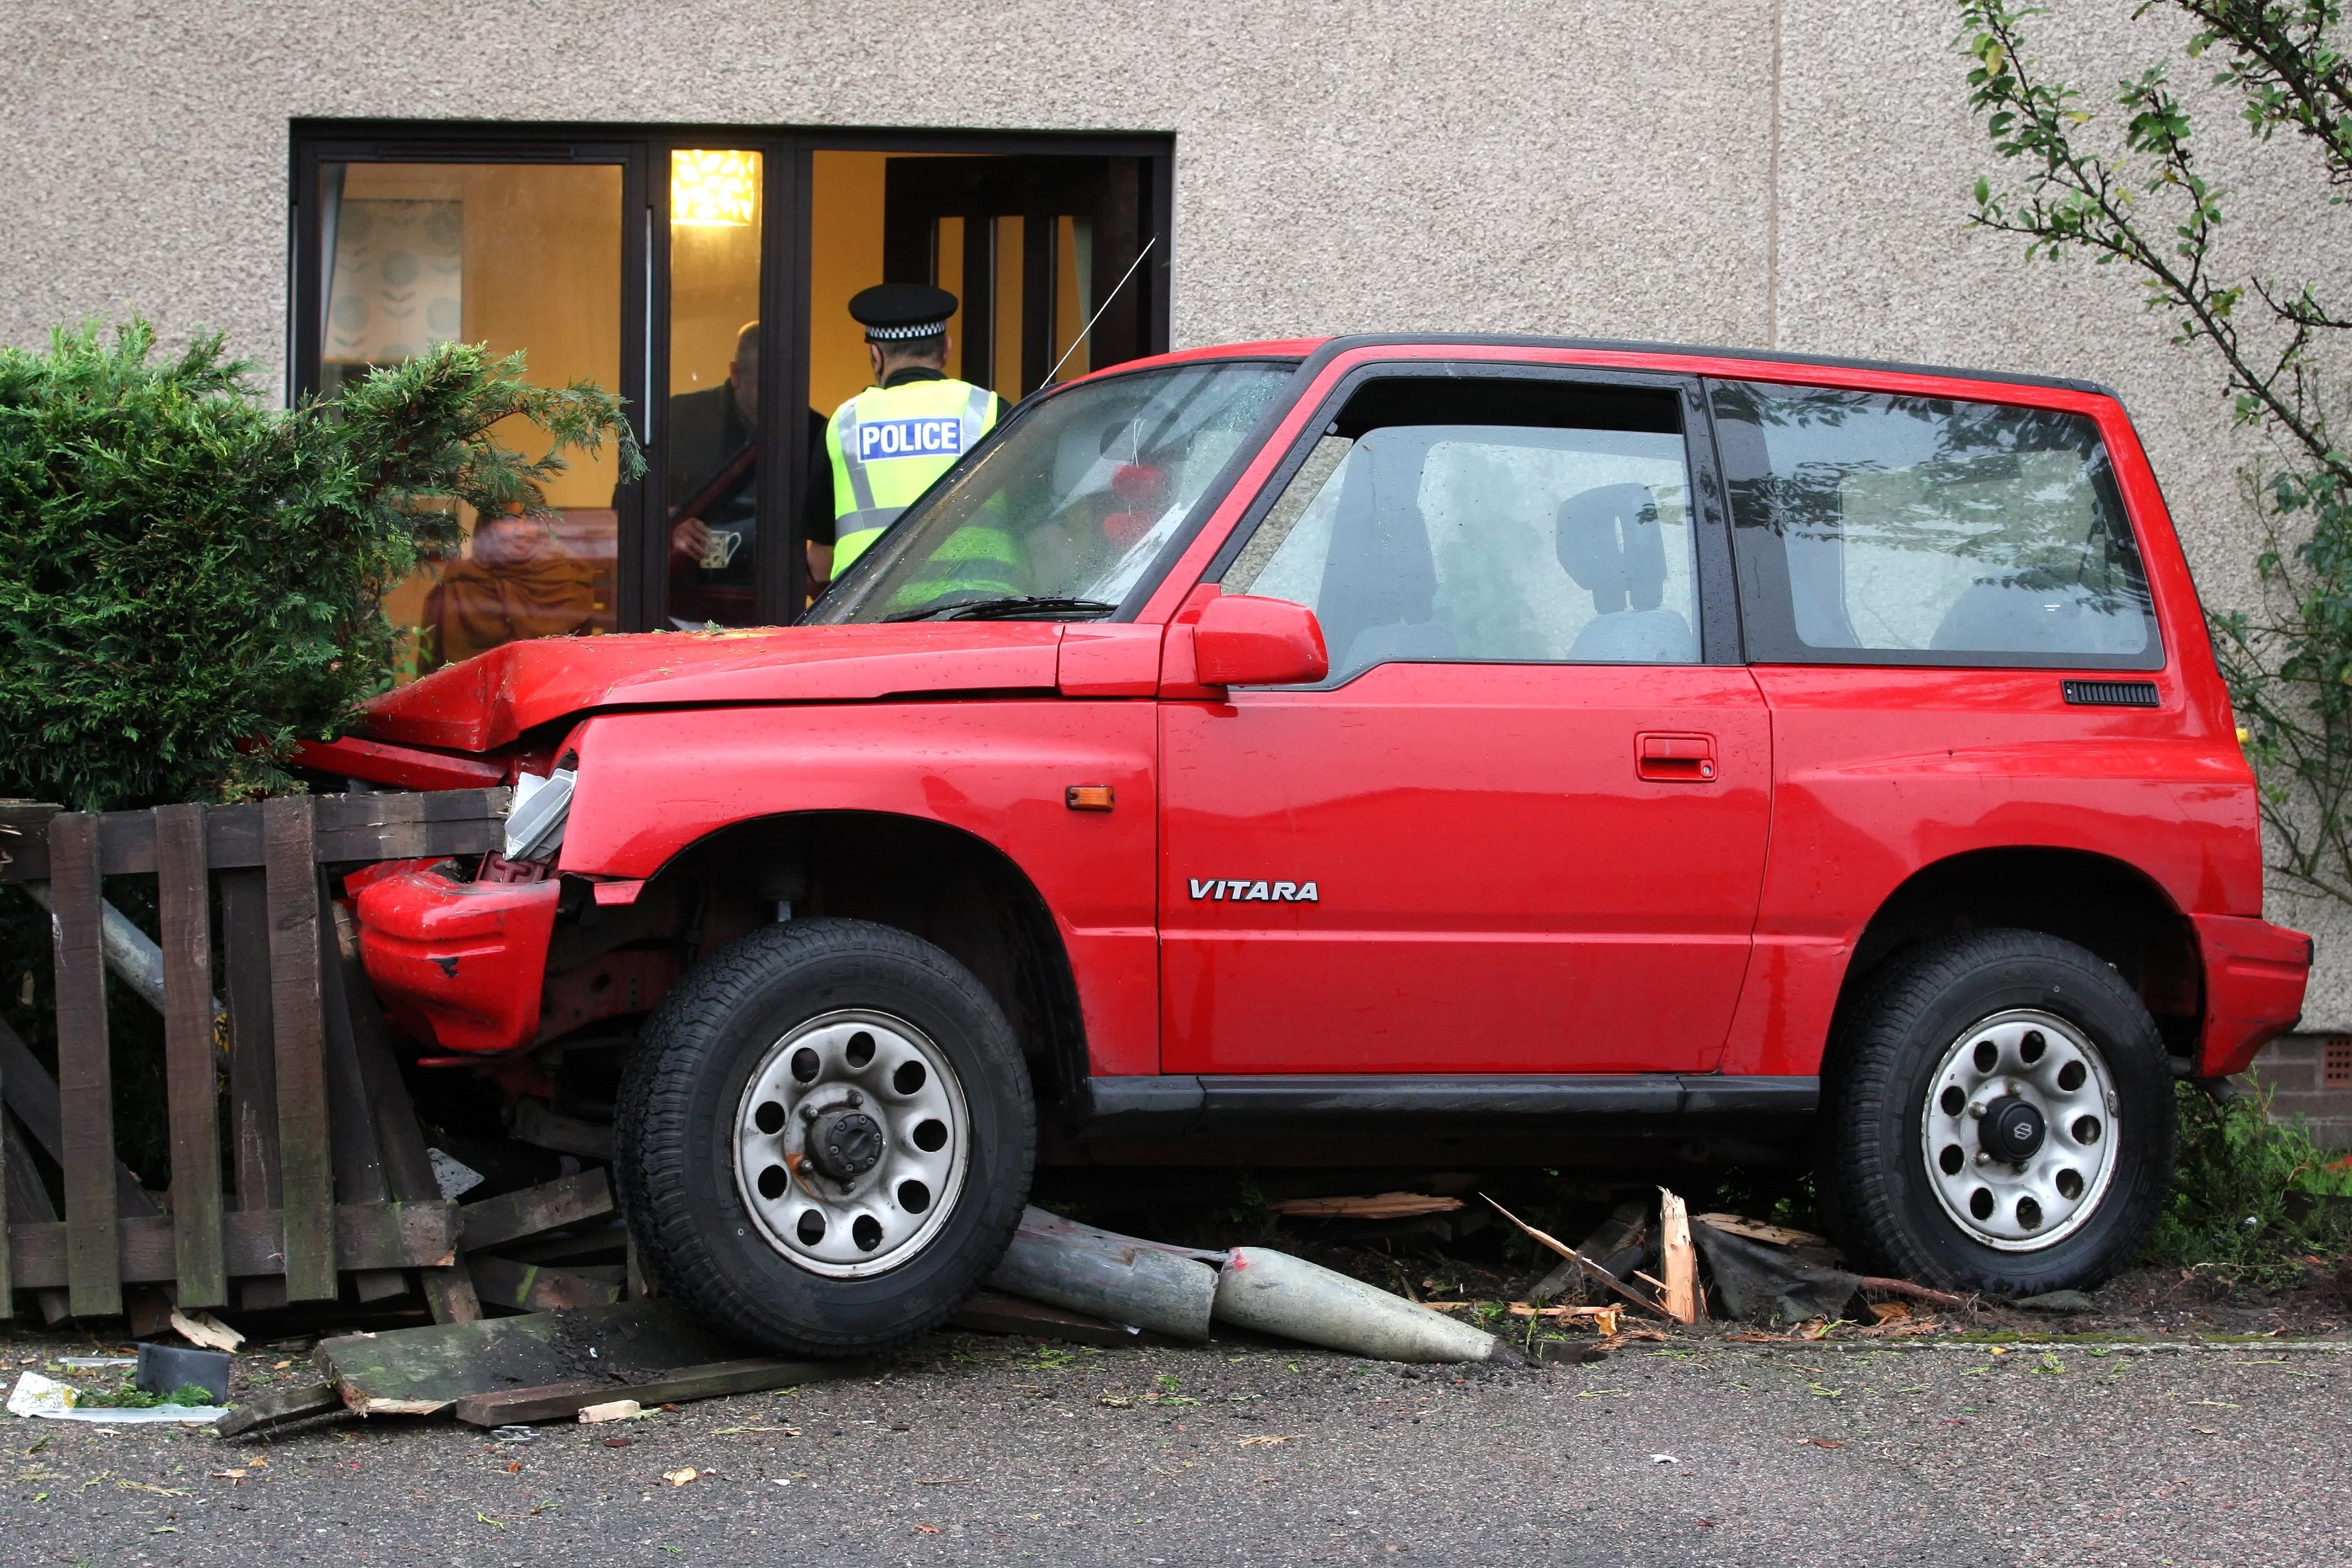 The red Suziki Vitara crashed through the fence of a residential property and came to a halt in the garden, destroying a lamp post in the process.